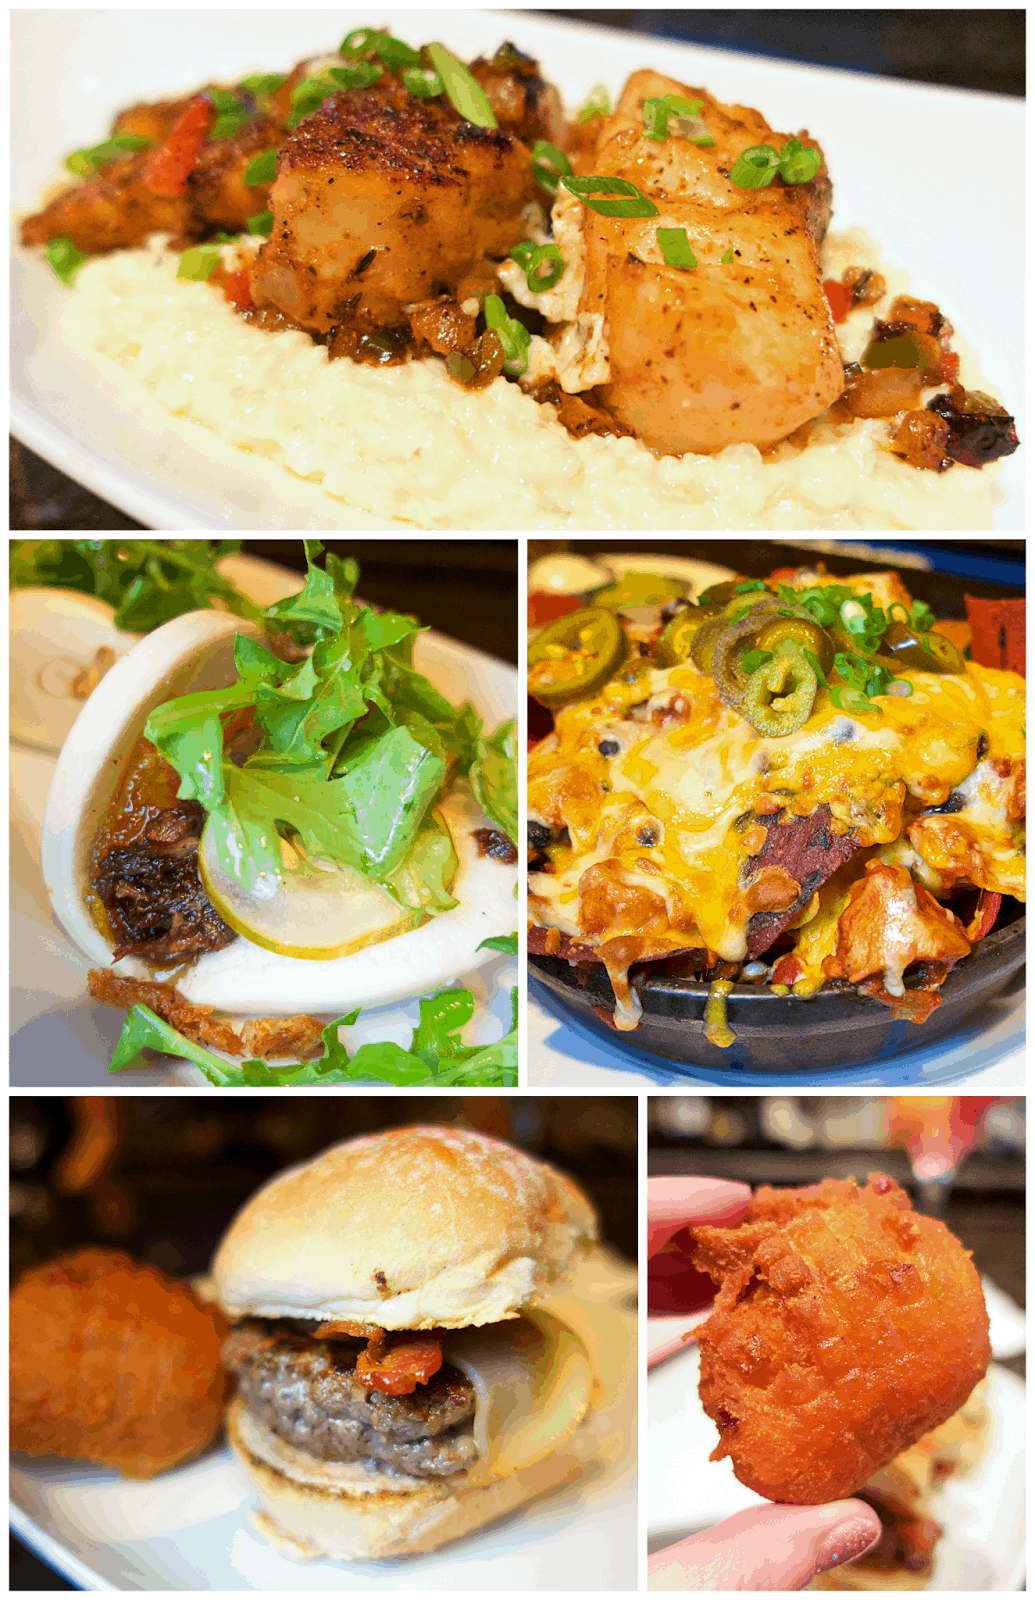 The food at Nineteen at TPC Sawgrass in Ponte Vedra, FL - grouper and rice grits, beef sliders, duck steam buns and the best nachos ever!